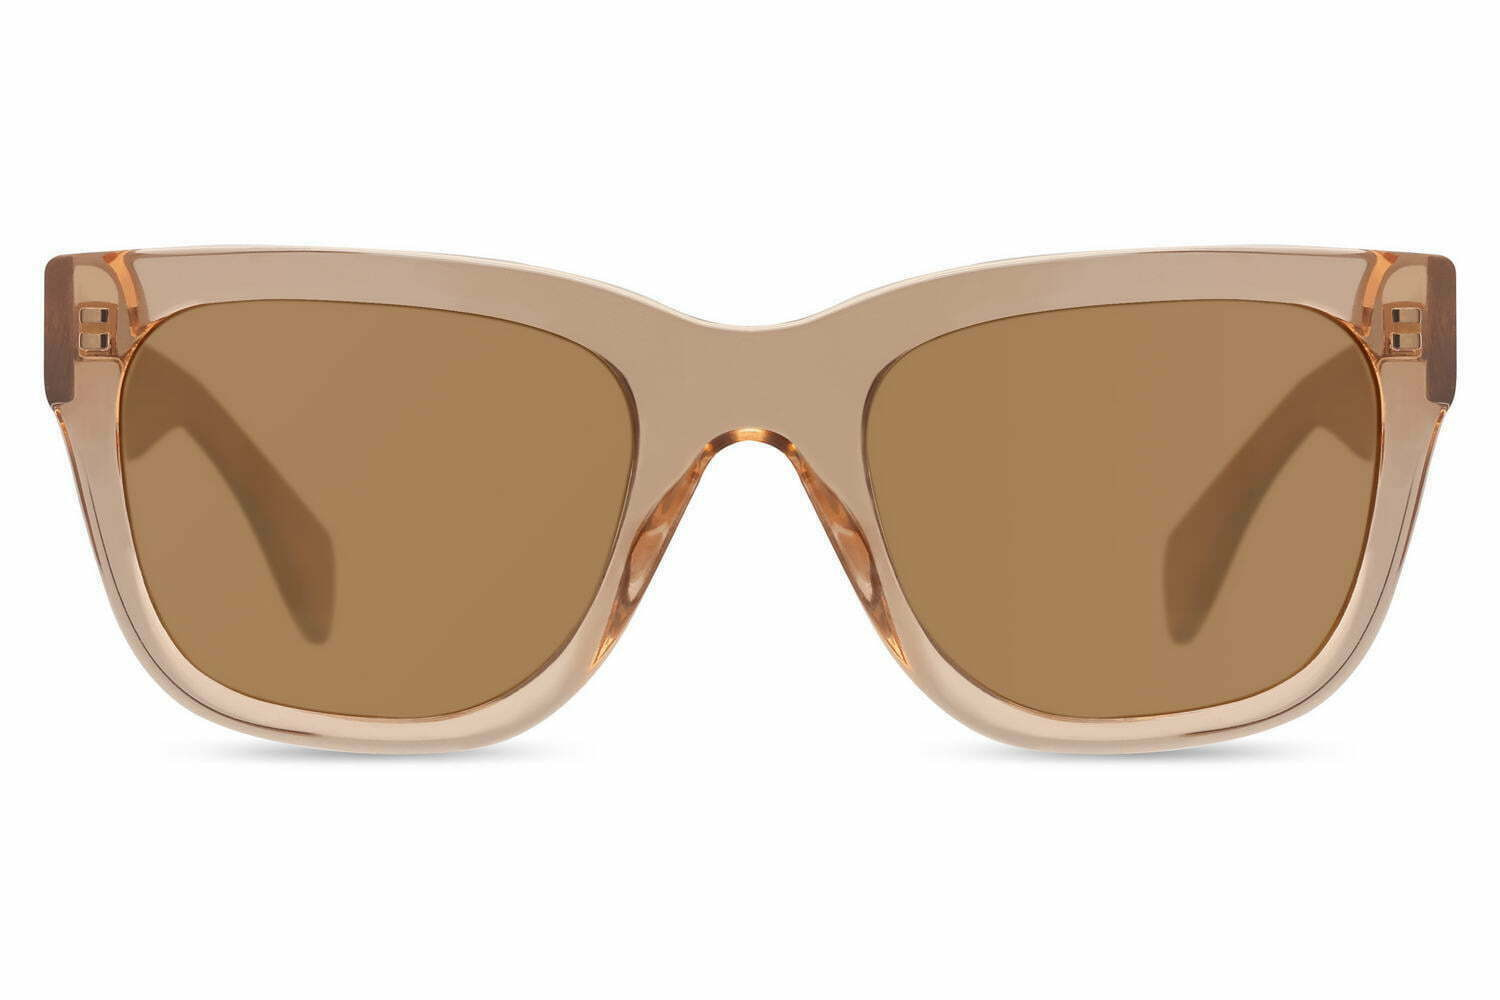 Apellis sunglasses with Brown color lens and Brown color frame